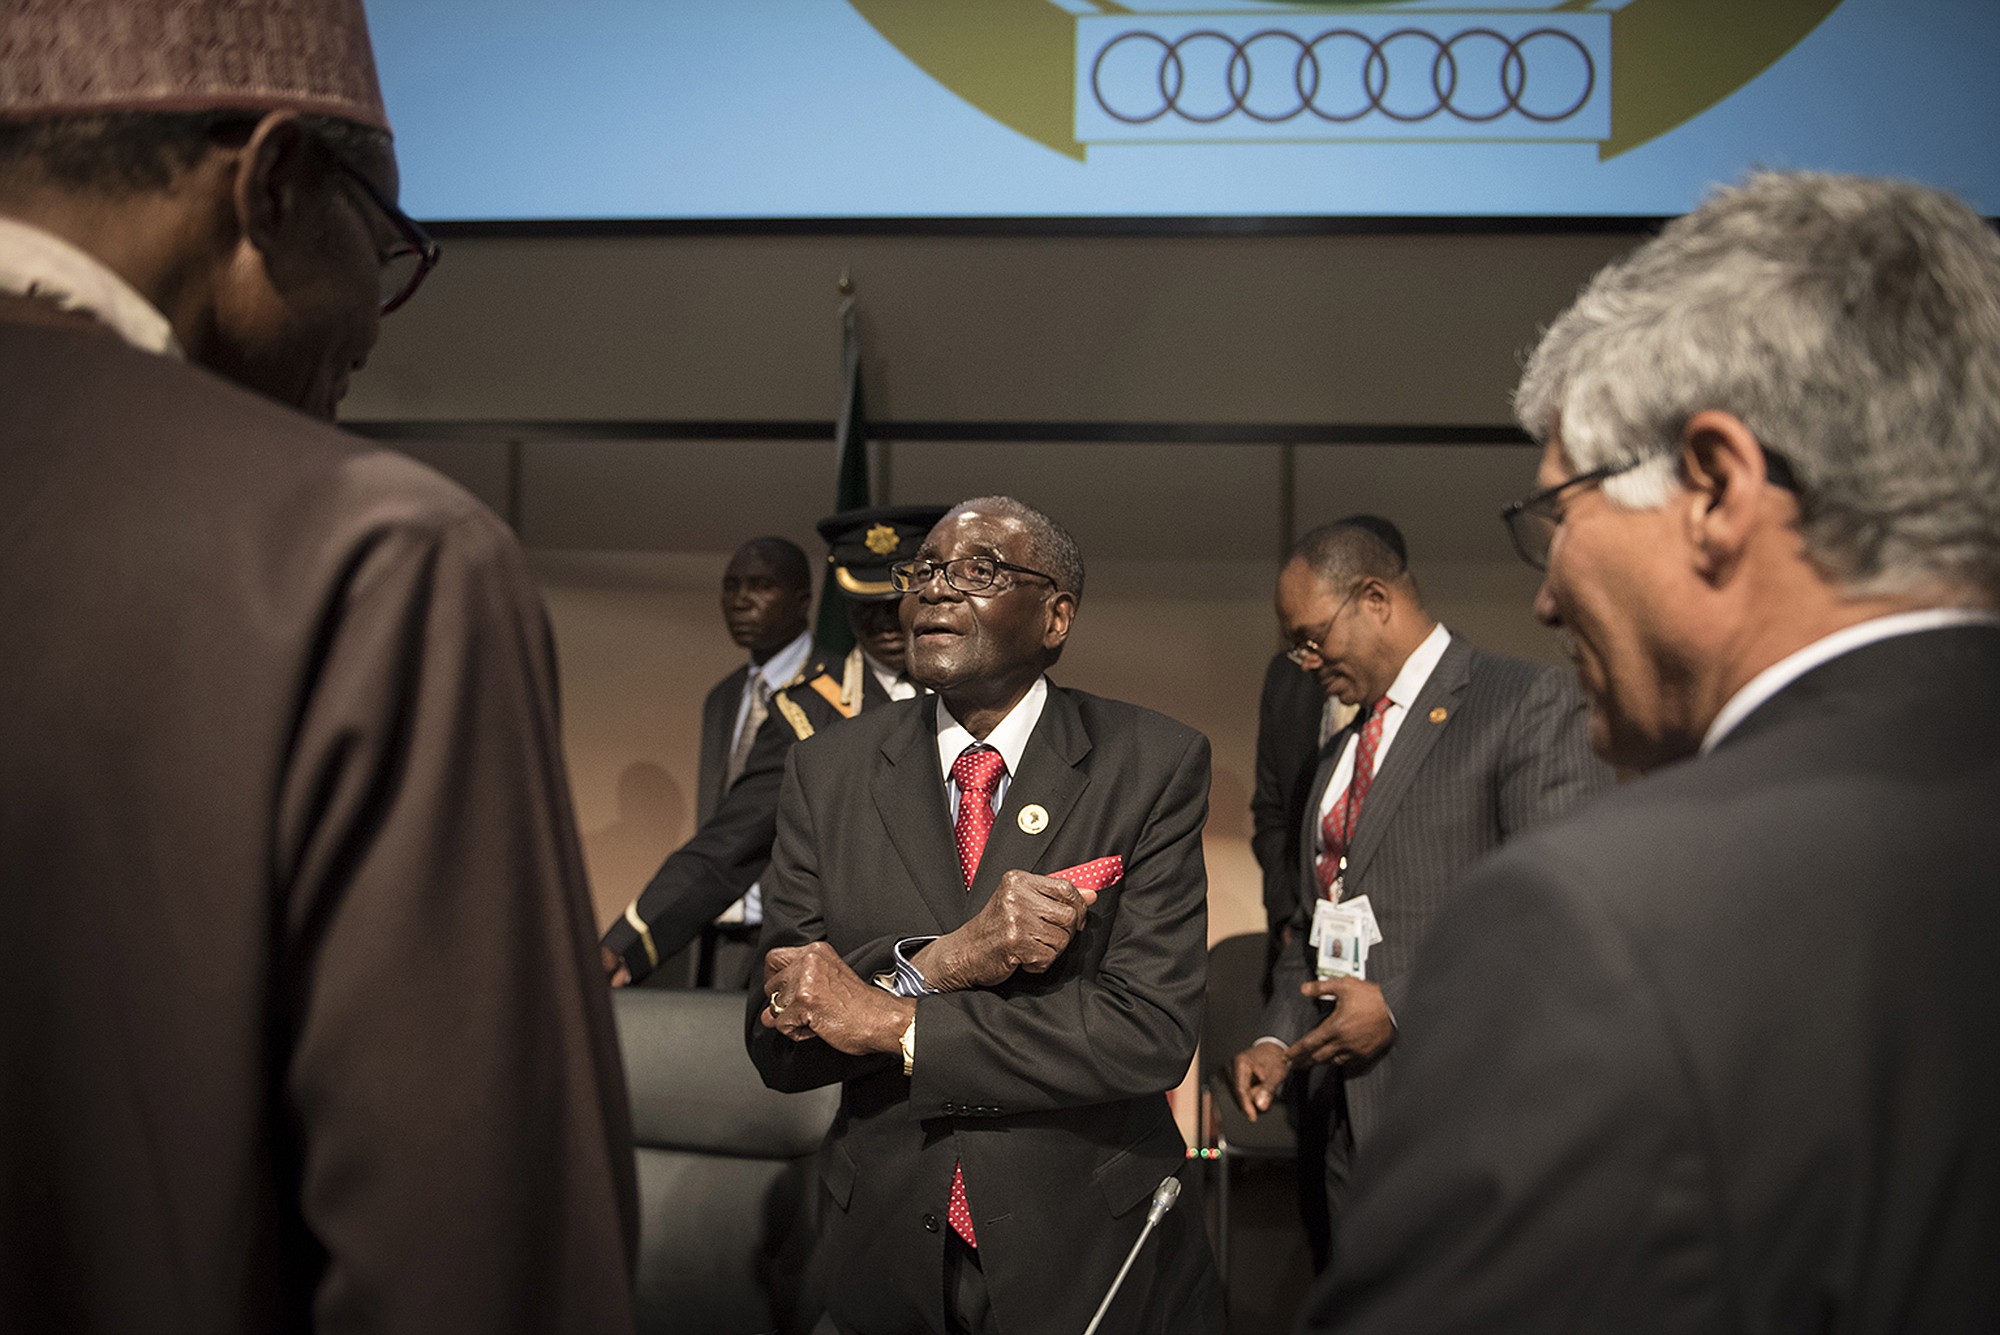 Zimbabwe president, and chair of the African Unity Summit, Robert Mugabe, center, speaks to delegates at the end 25th AU Summit in Johannesburg on Monday.